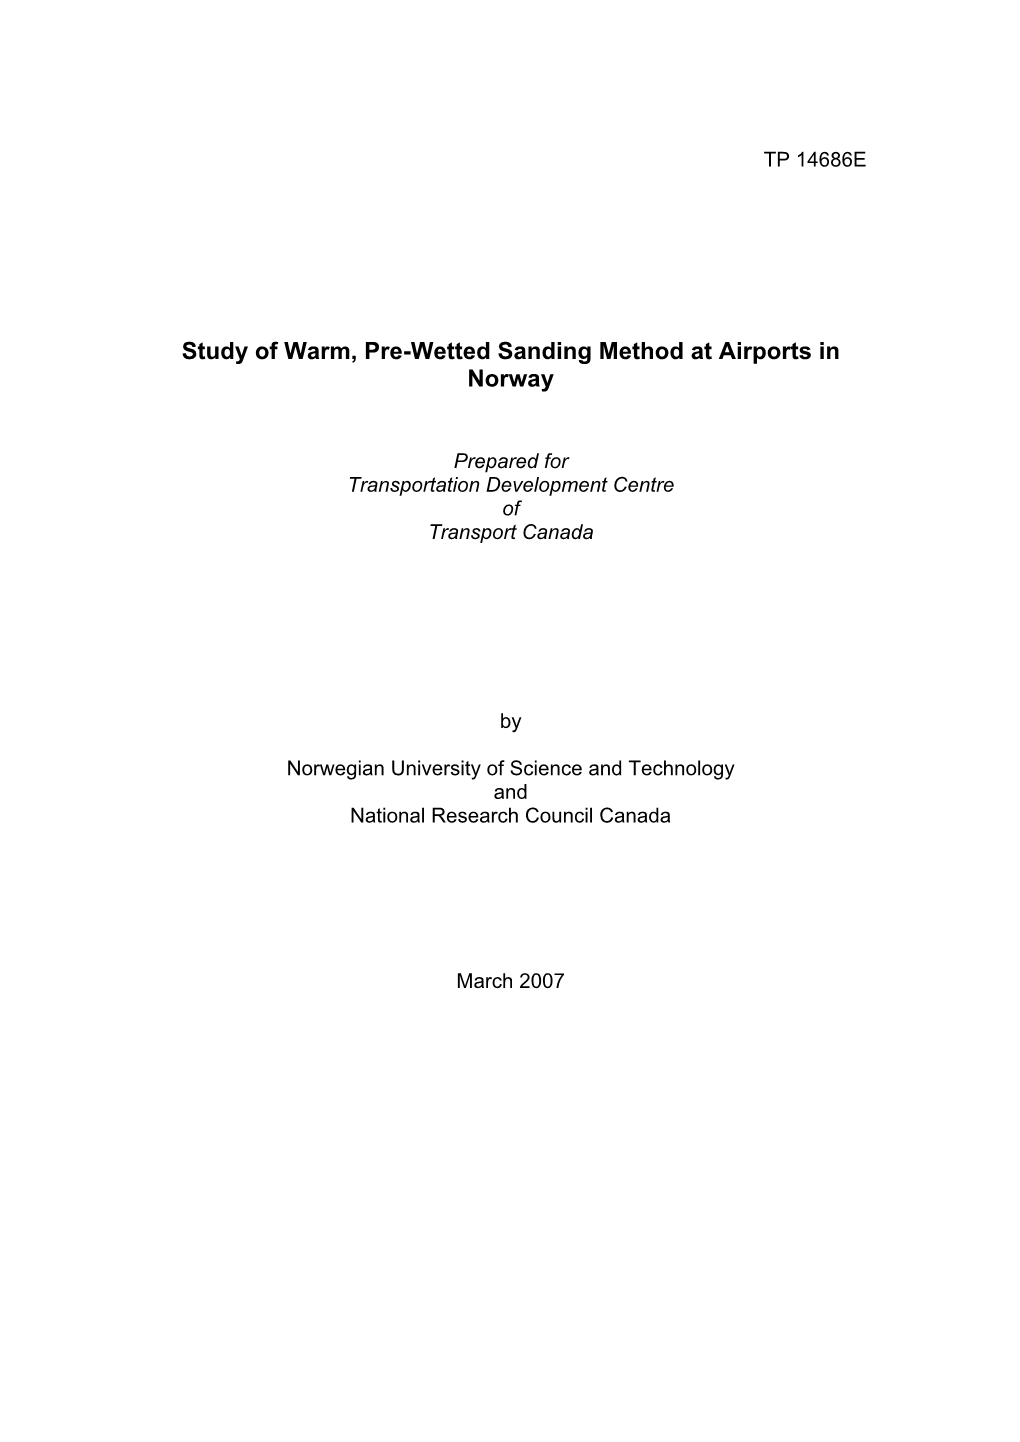 Study of Warm, Pre-Wetted Sanding Method at Airports in Norway